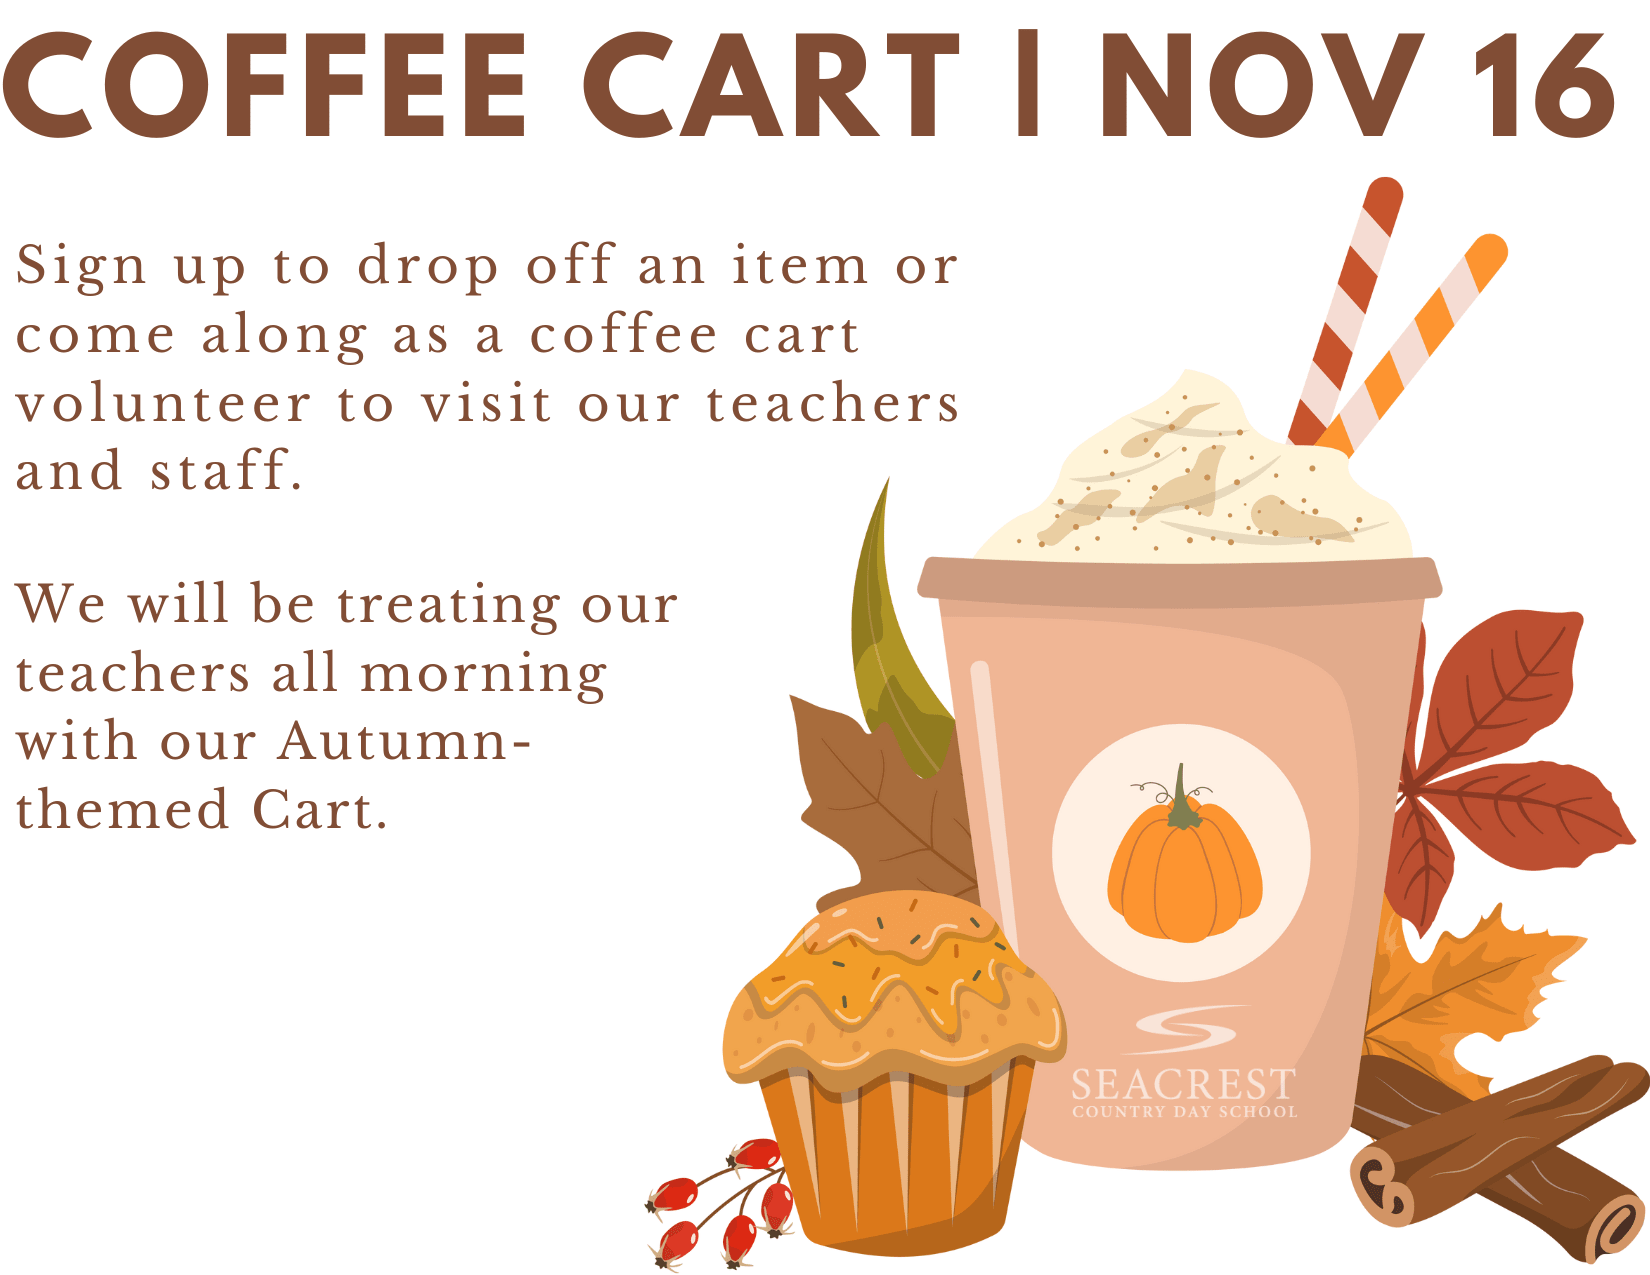 Sign Up for Coffee Cart